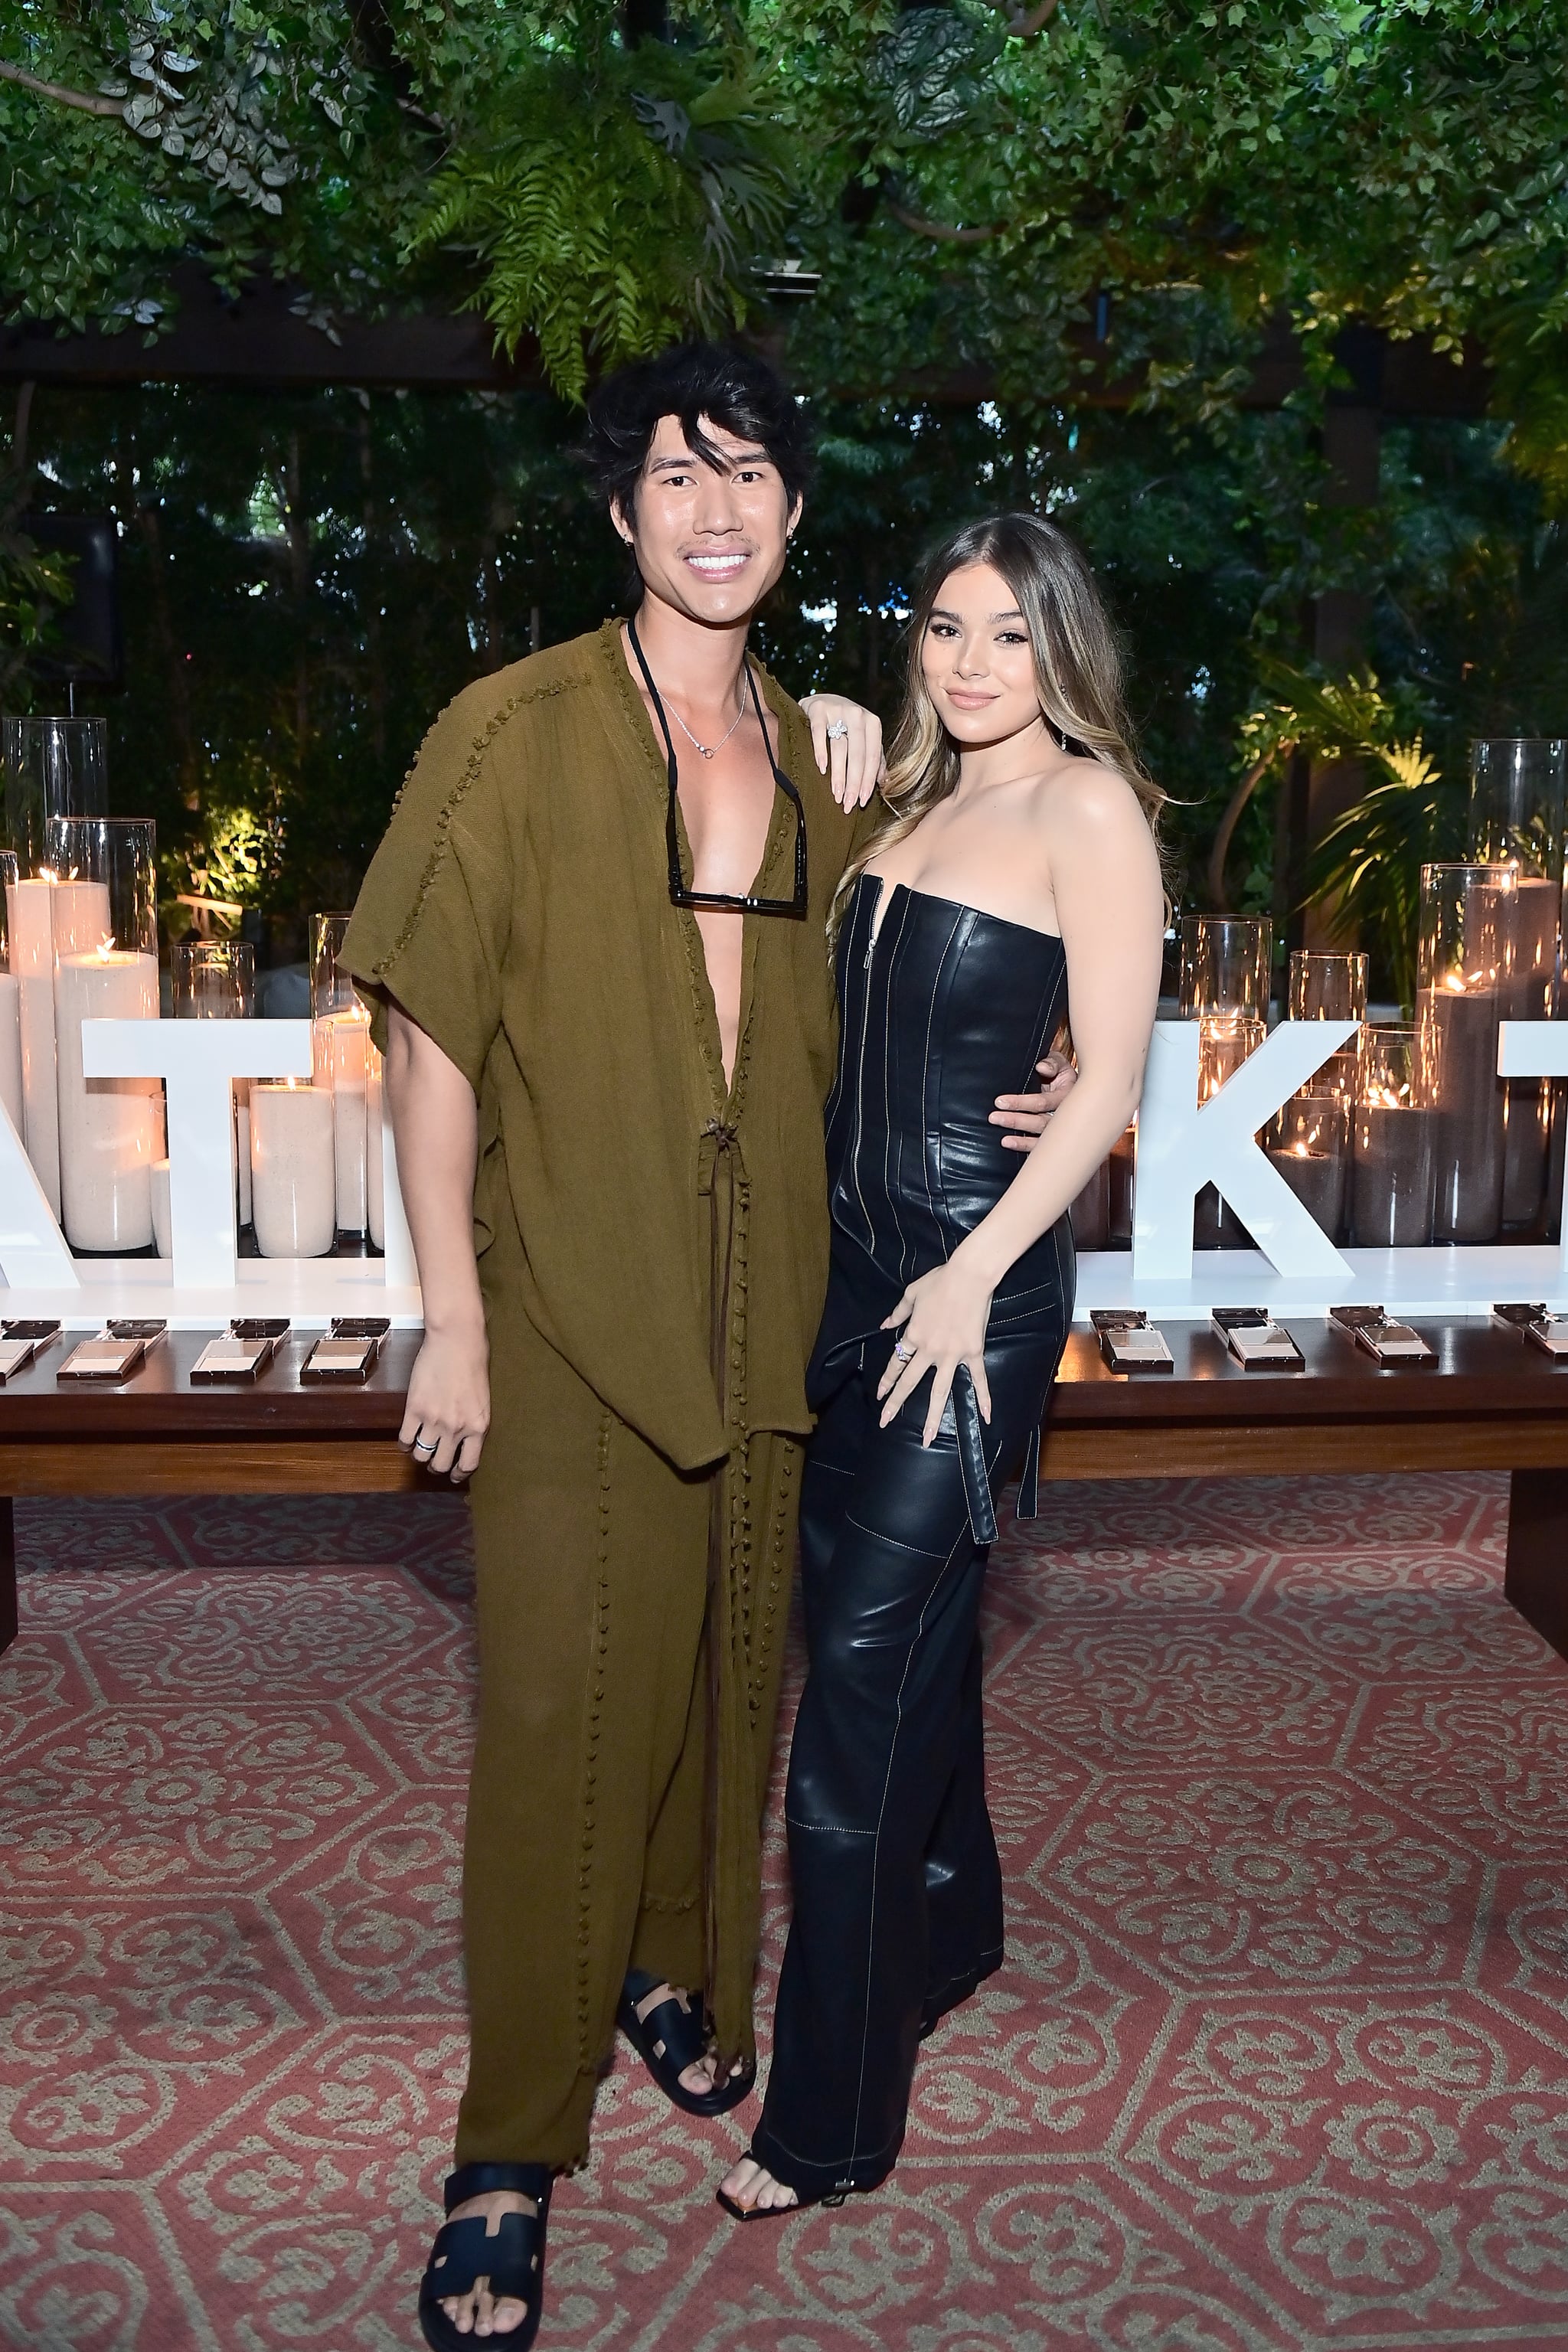 WEST HOLLYWOOD, CALIFORNIA - AUGUST 29: (LR) Patrick Ta and Hailee Steinfeld attend Patrick Ta Beauty's Major Skin Launch at The West Hollywood EDITION on August 29, 2022 in West Hollywood, California.  (Photo by Stefanie Keenan/Getty Images)